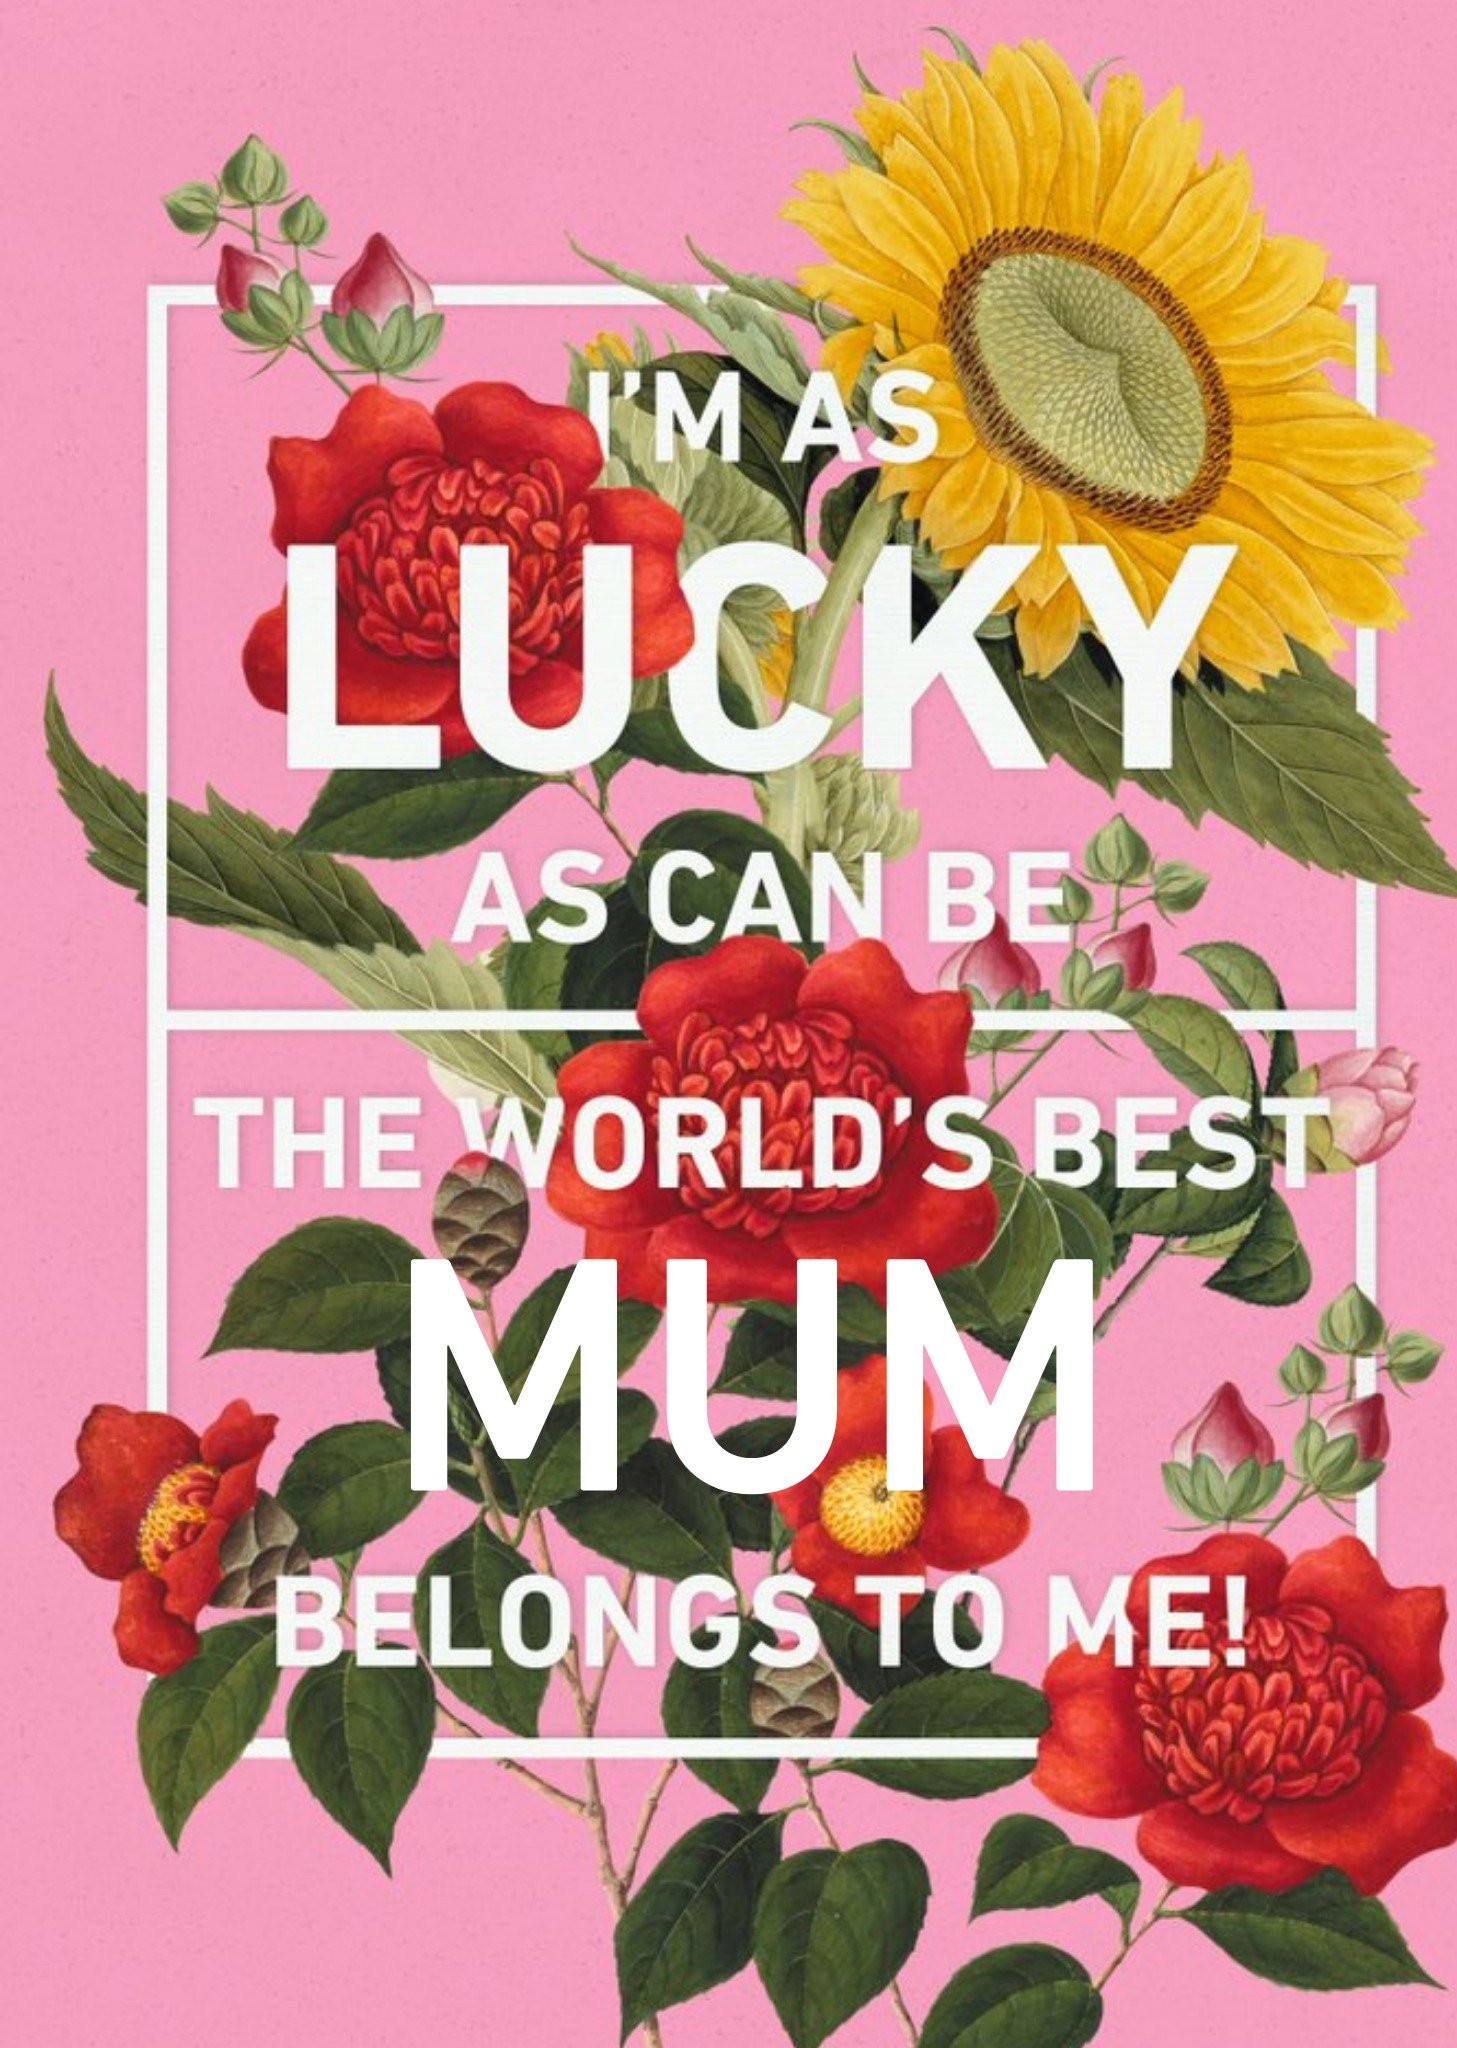 The Natural History Museum Mother's Day Card - Pretty Floral Card - World's Best Mum, Large